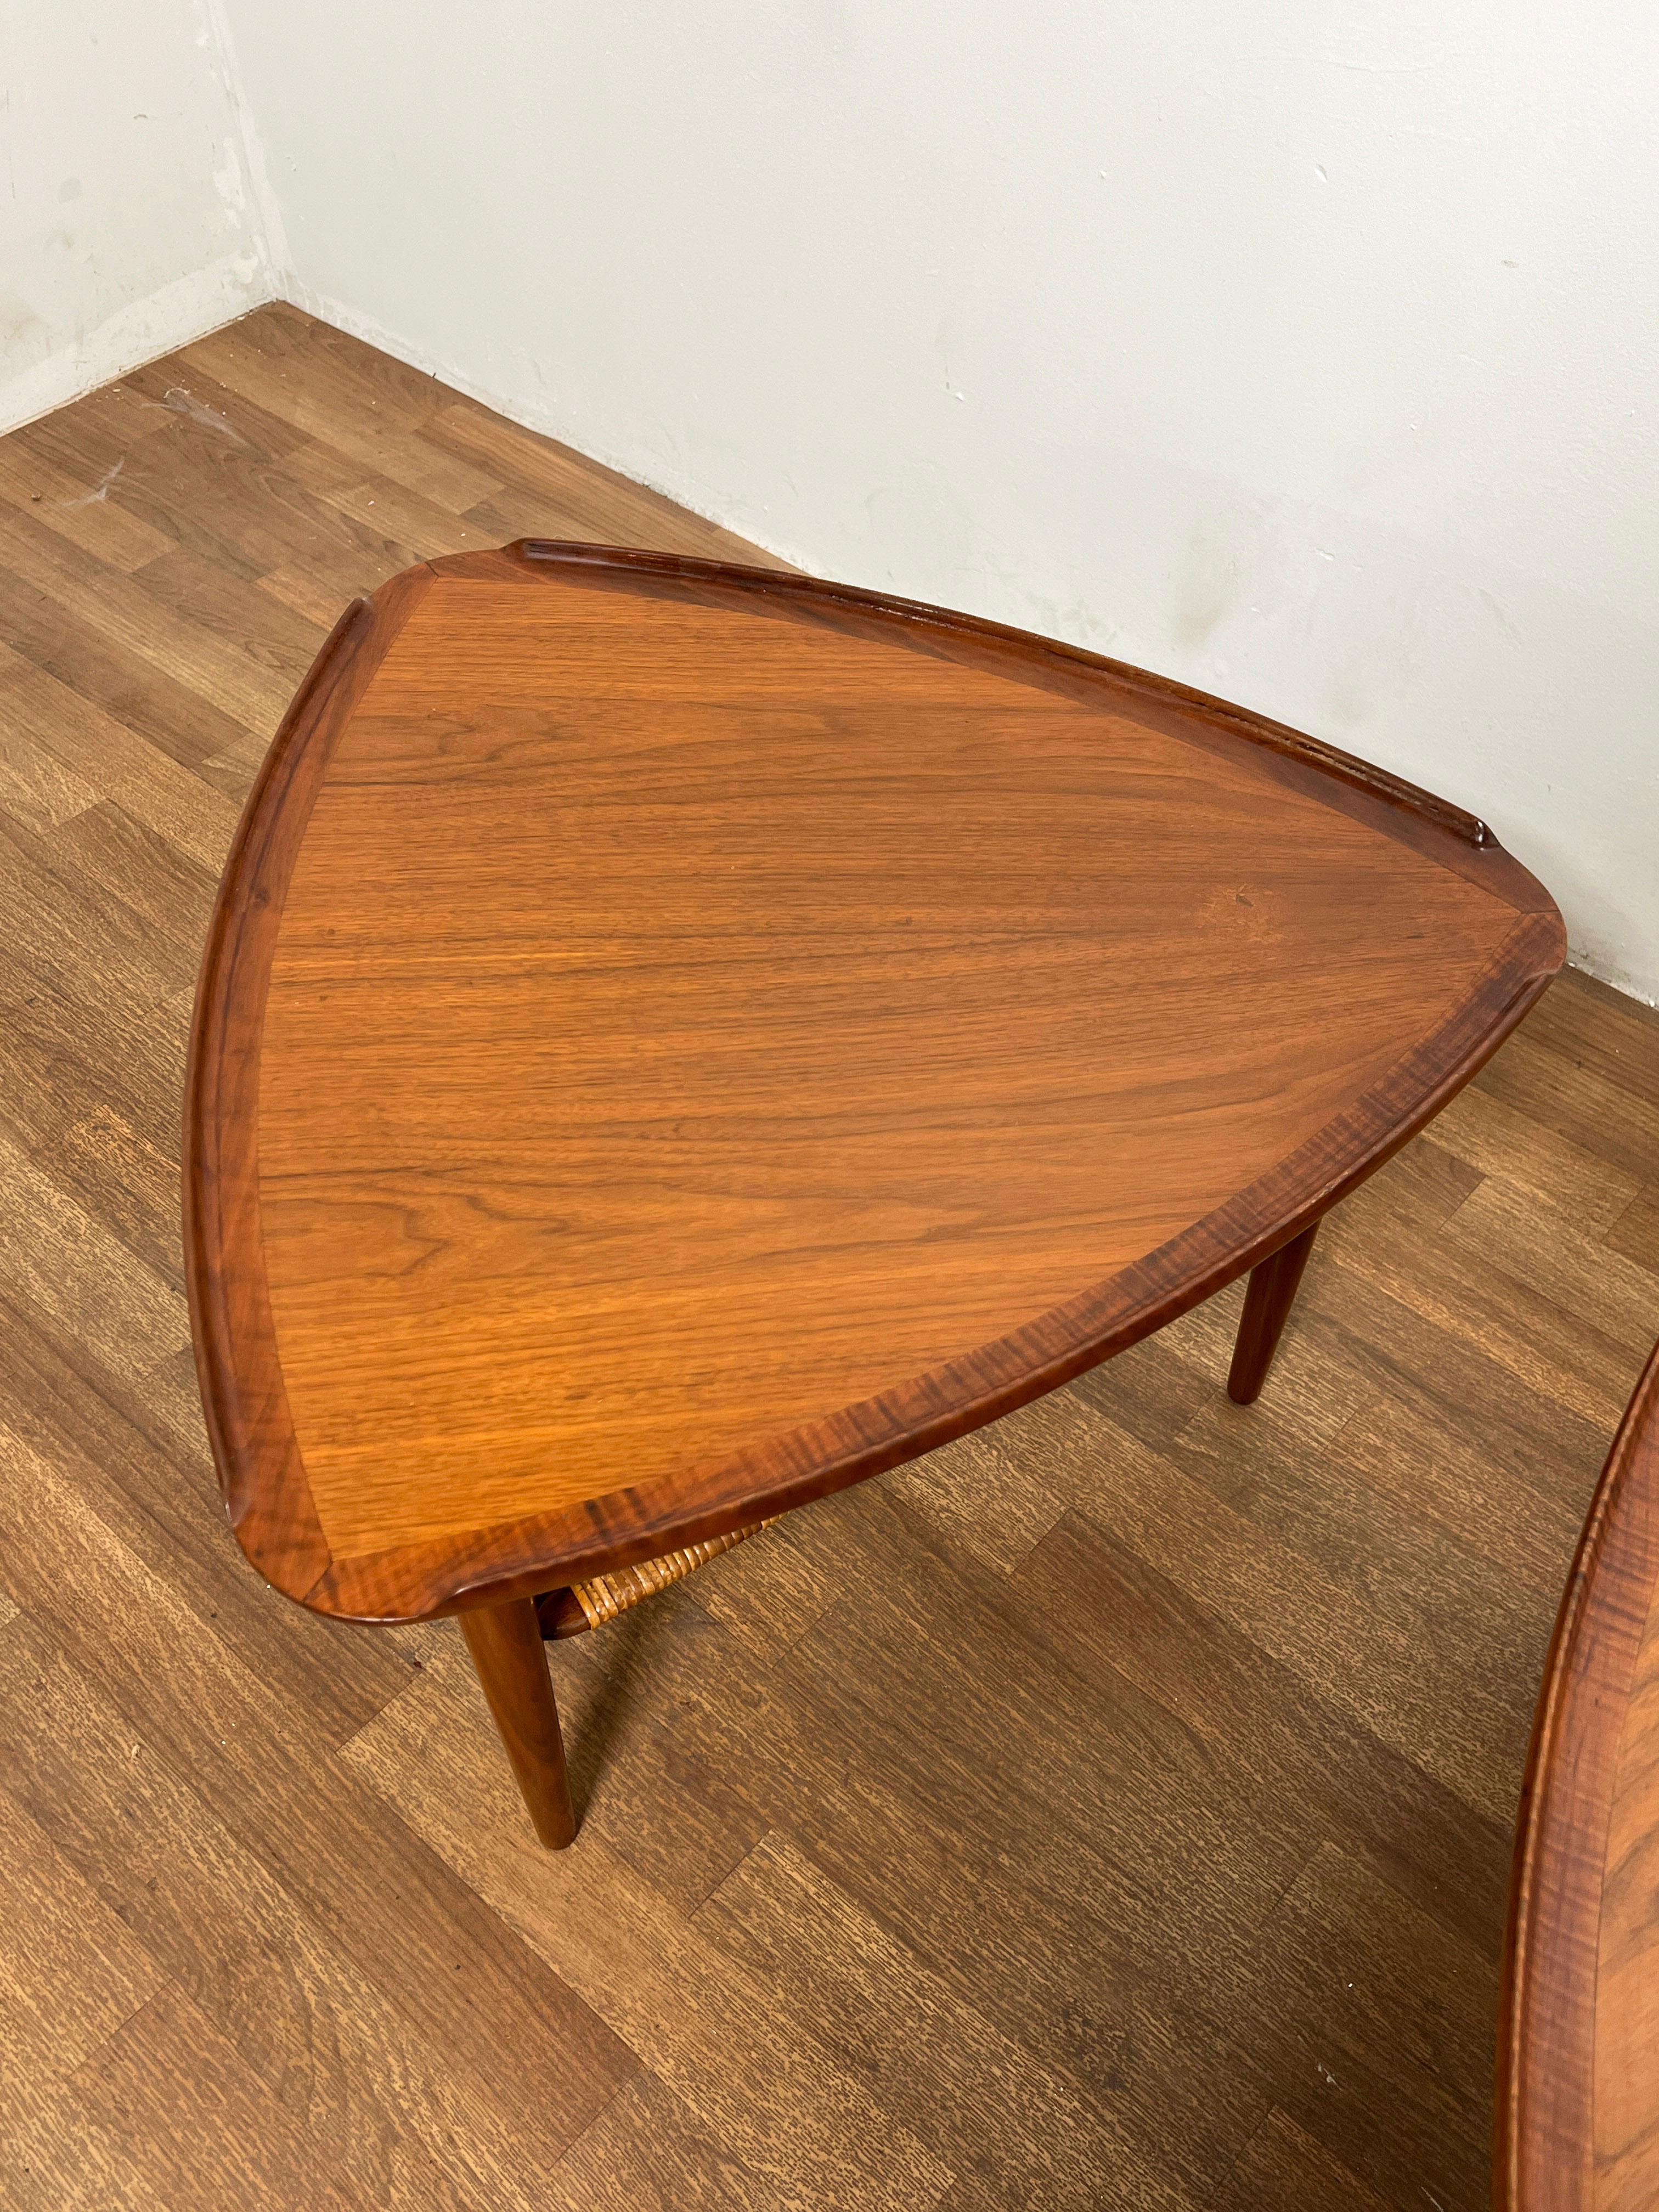 Scandinavian Modern Pair of Poul Jensen for Selig Teak and Cane Tripod Side Tables C. 1960s For Sale